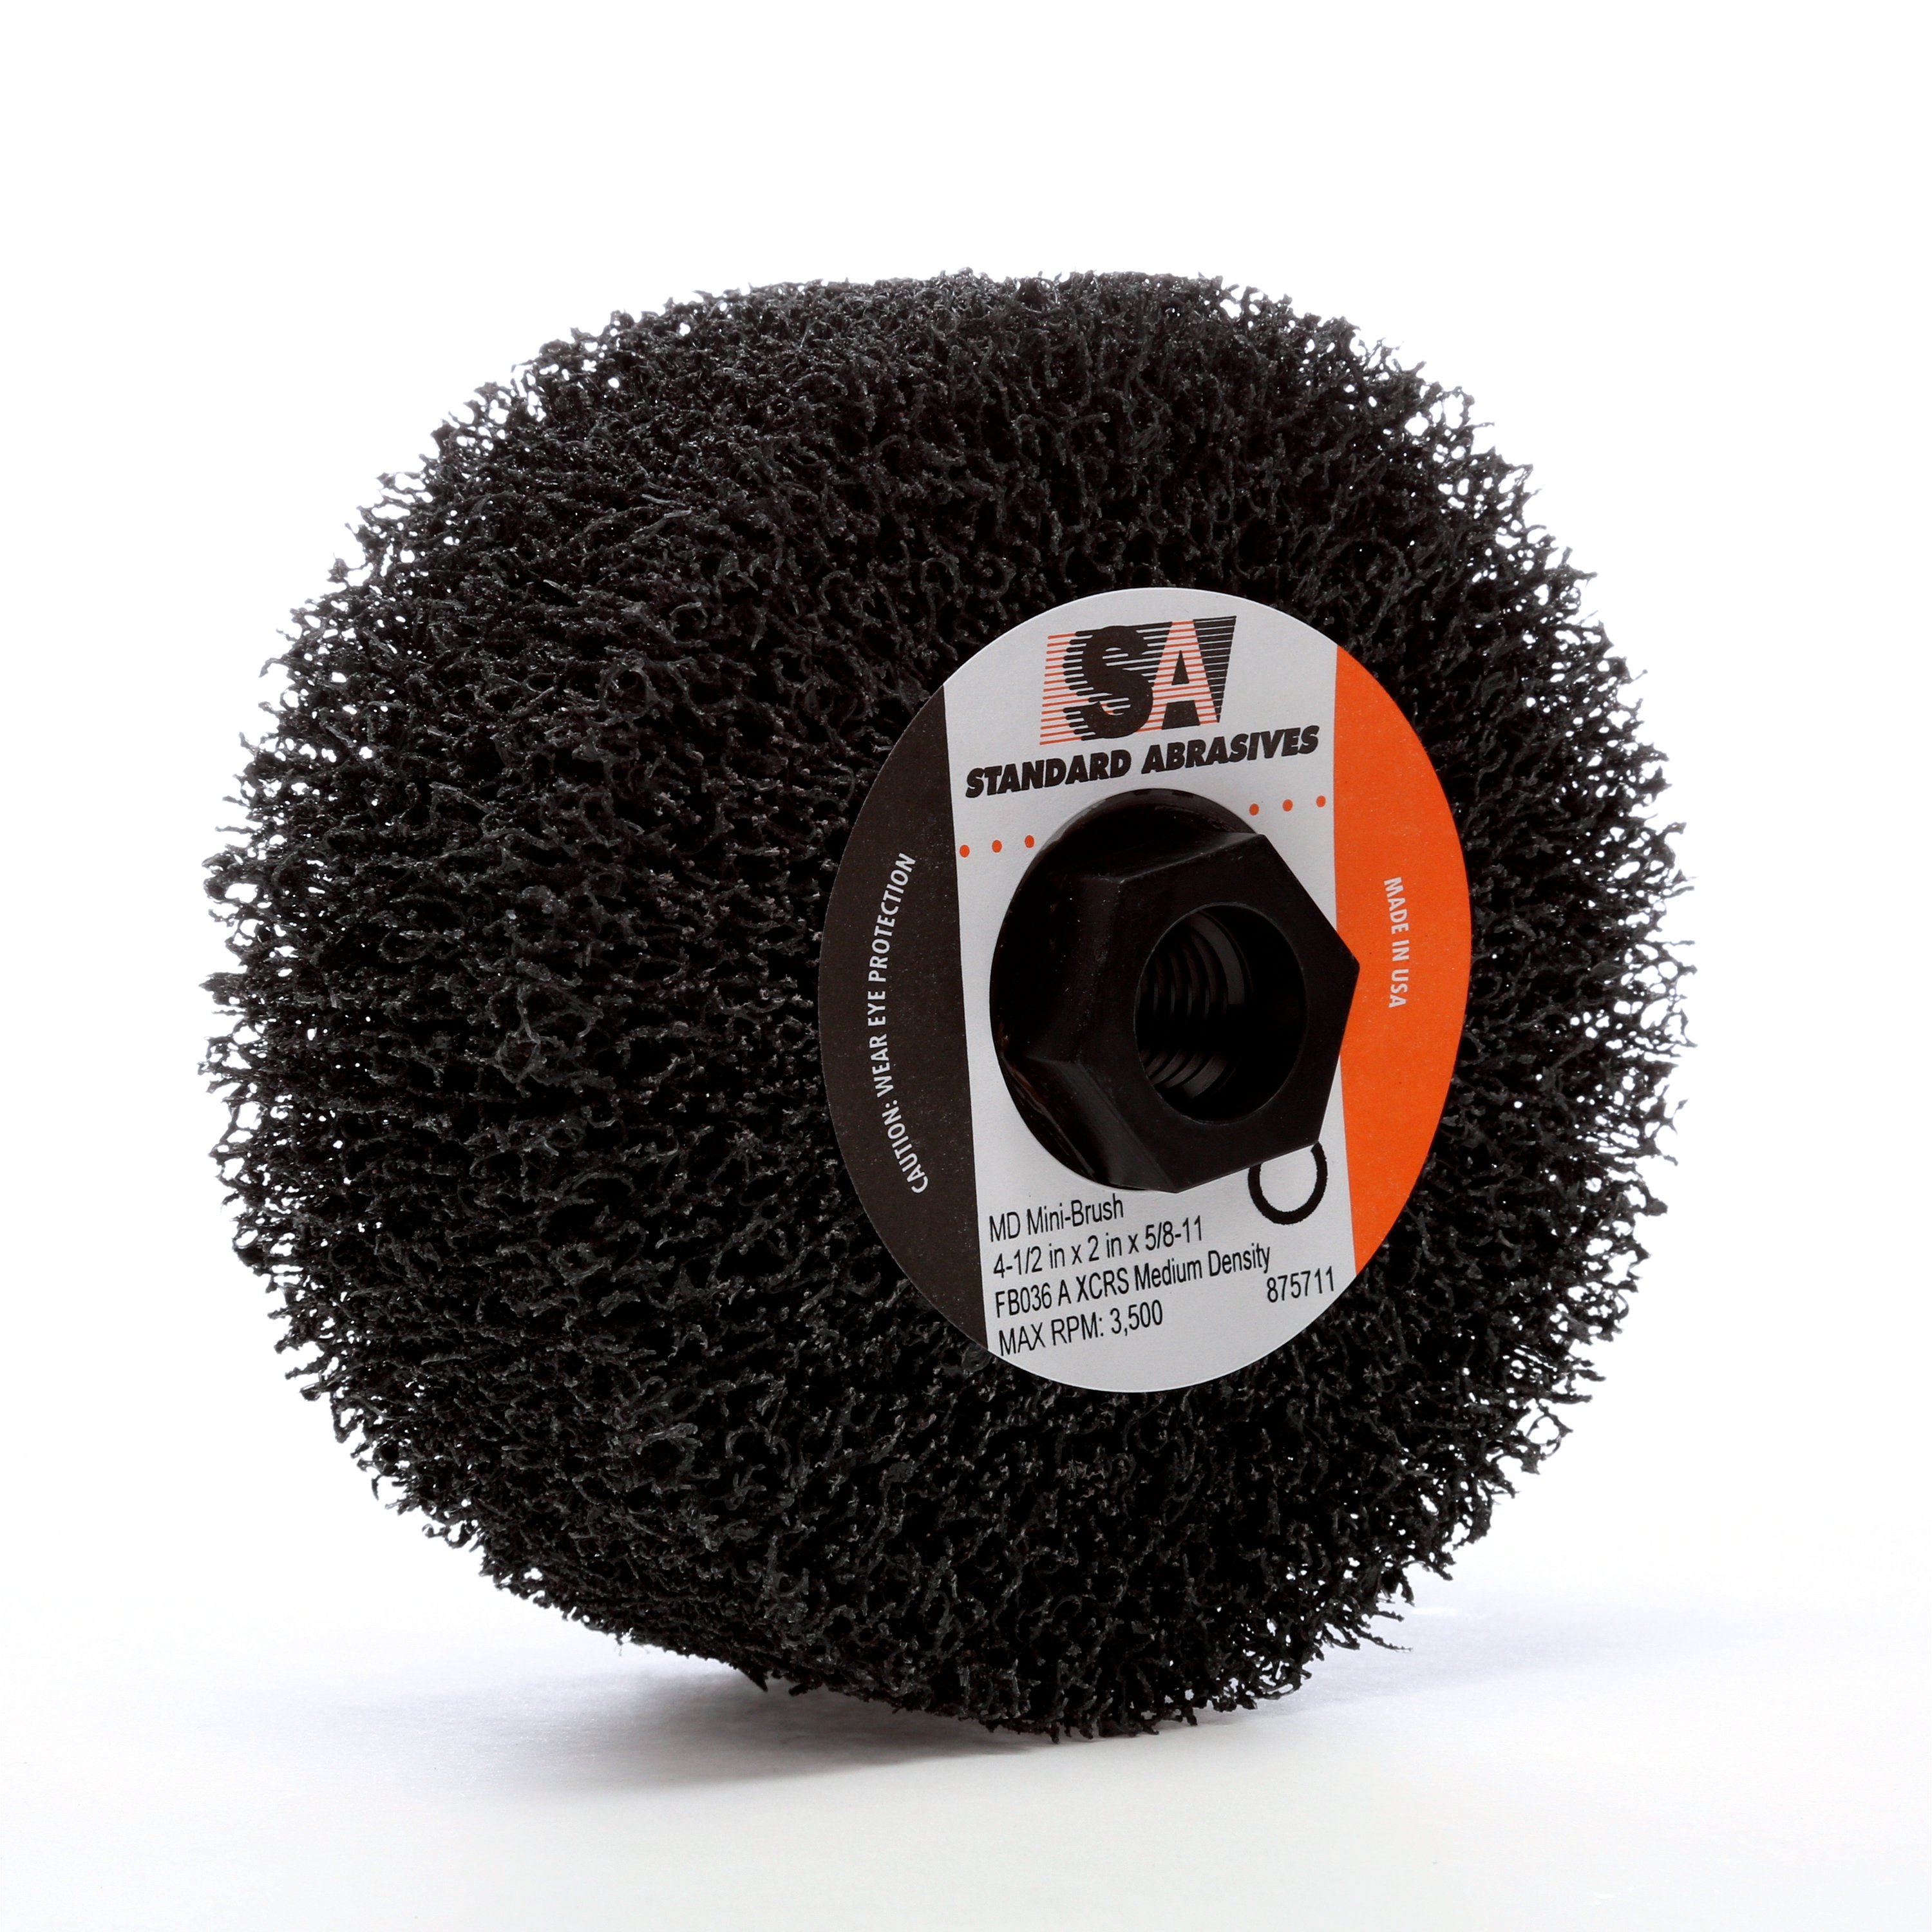 The Standard Abrasives™ MD Mini-Brush is constructed with aluminum oxide mineral